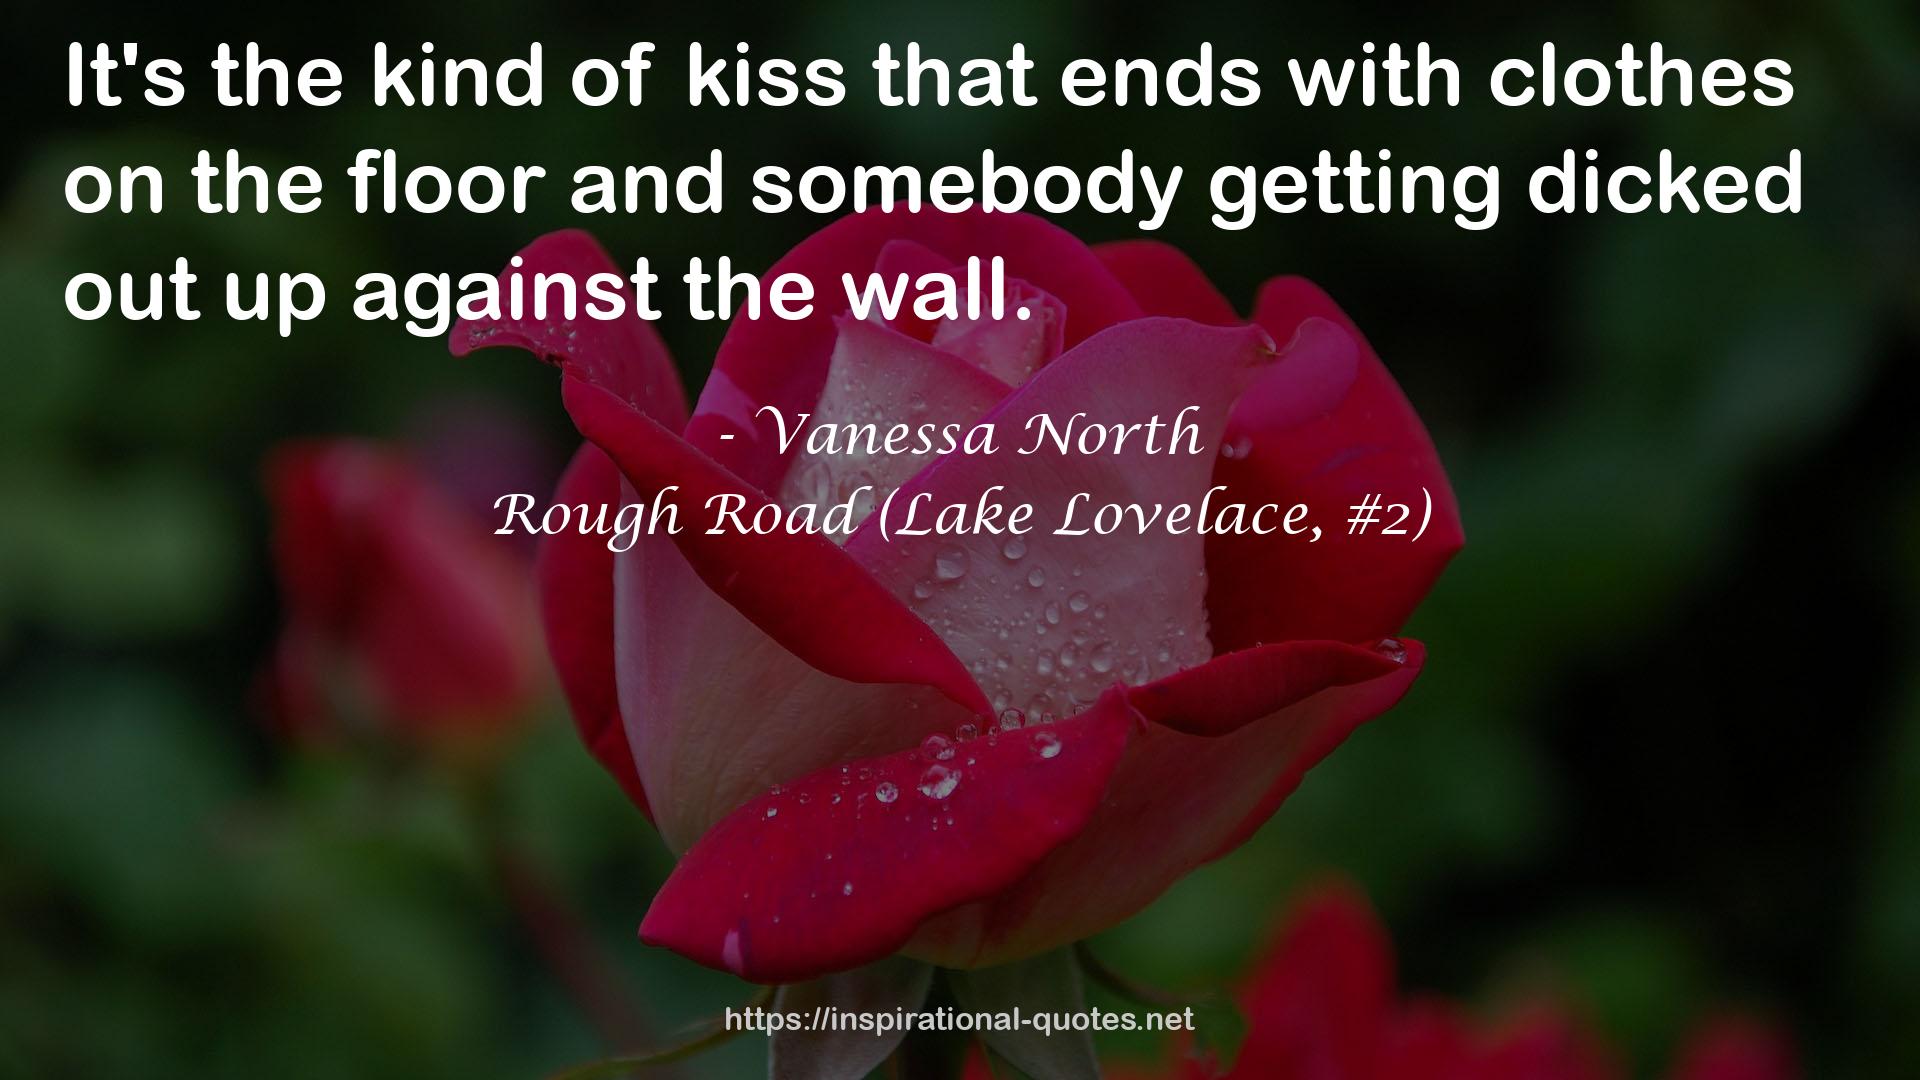 Rough Road (Lake Lovelace, #2) QUOTES